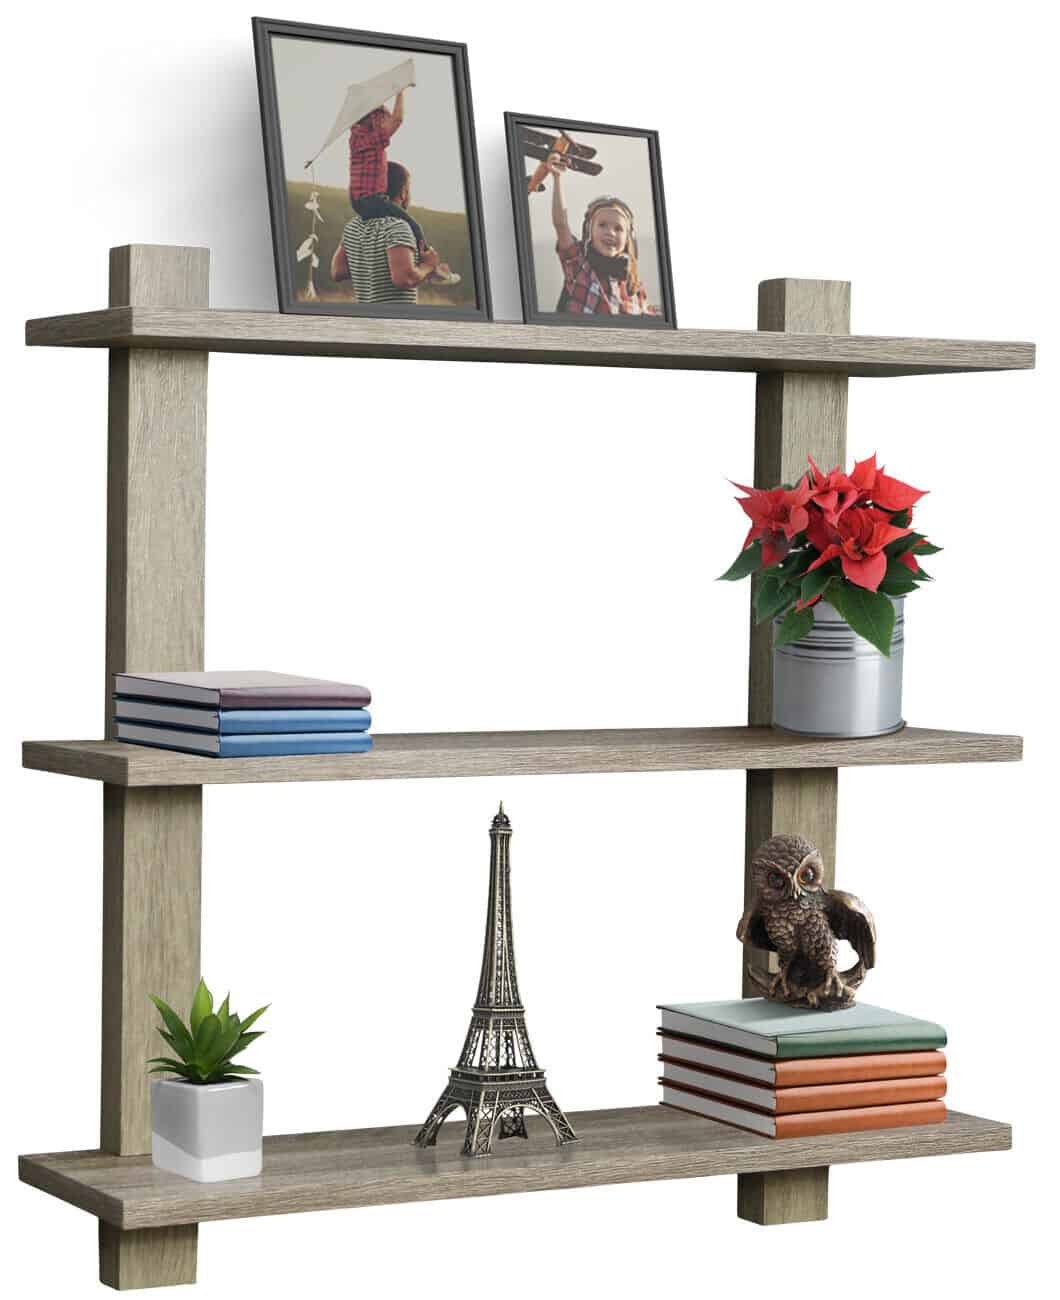 A wooden shelf with pictures and a vase on it.